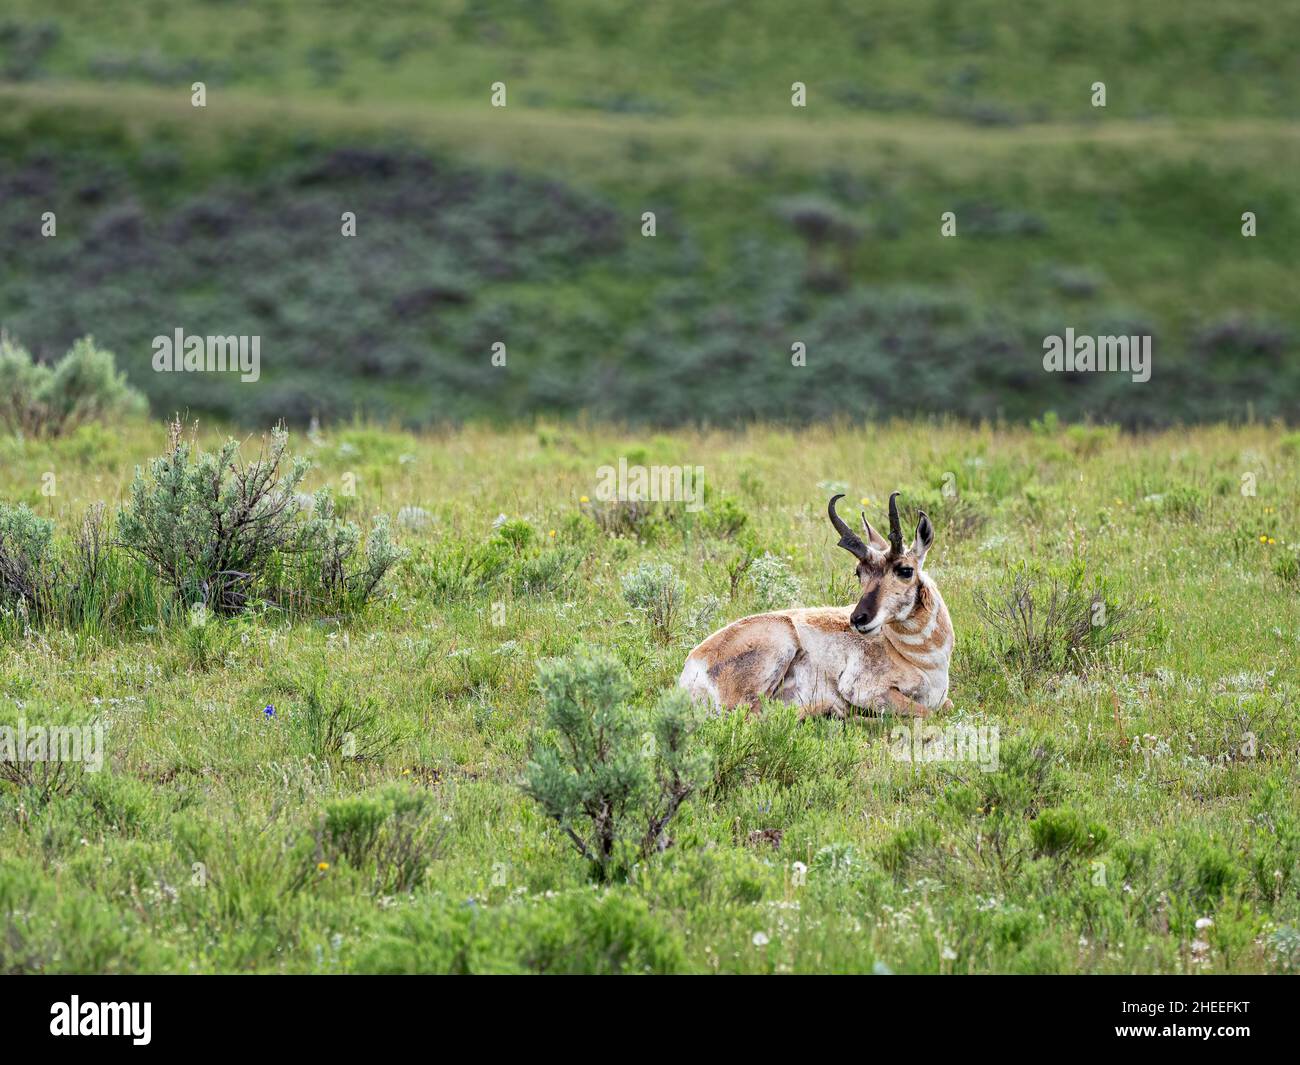 An adult pronghorn, Antilocapra americana, at rest in Yellowstone National Park, Wyoming. Stock Photo